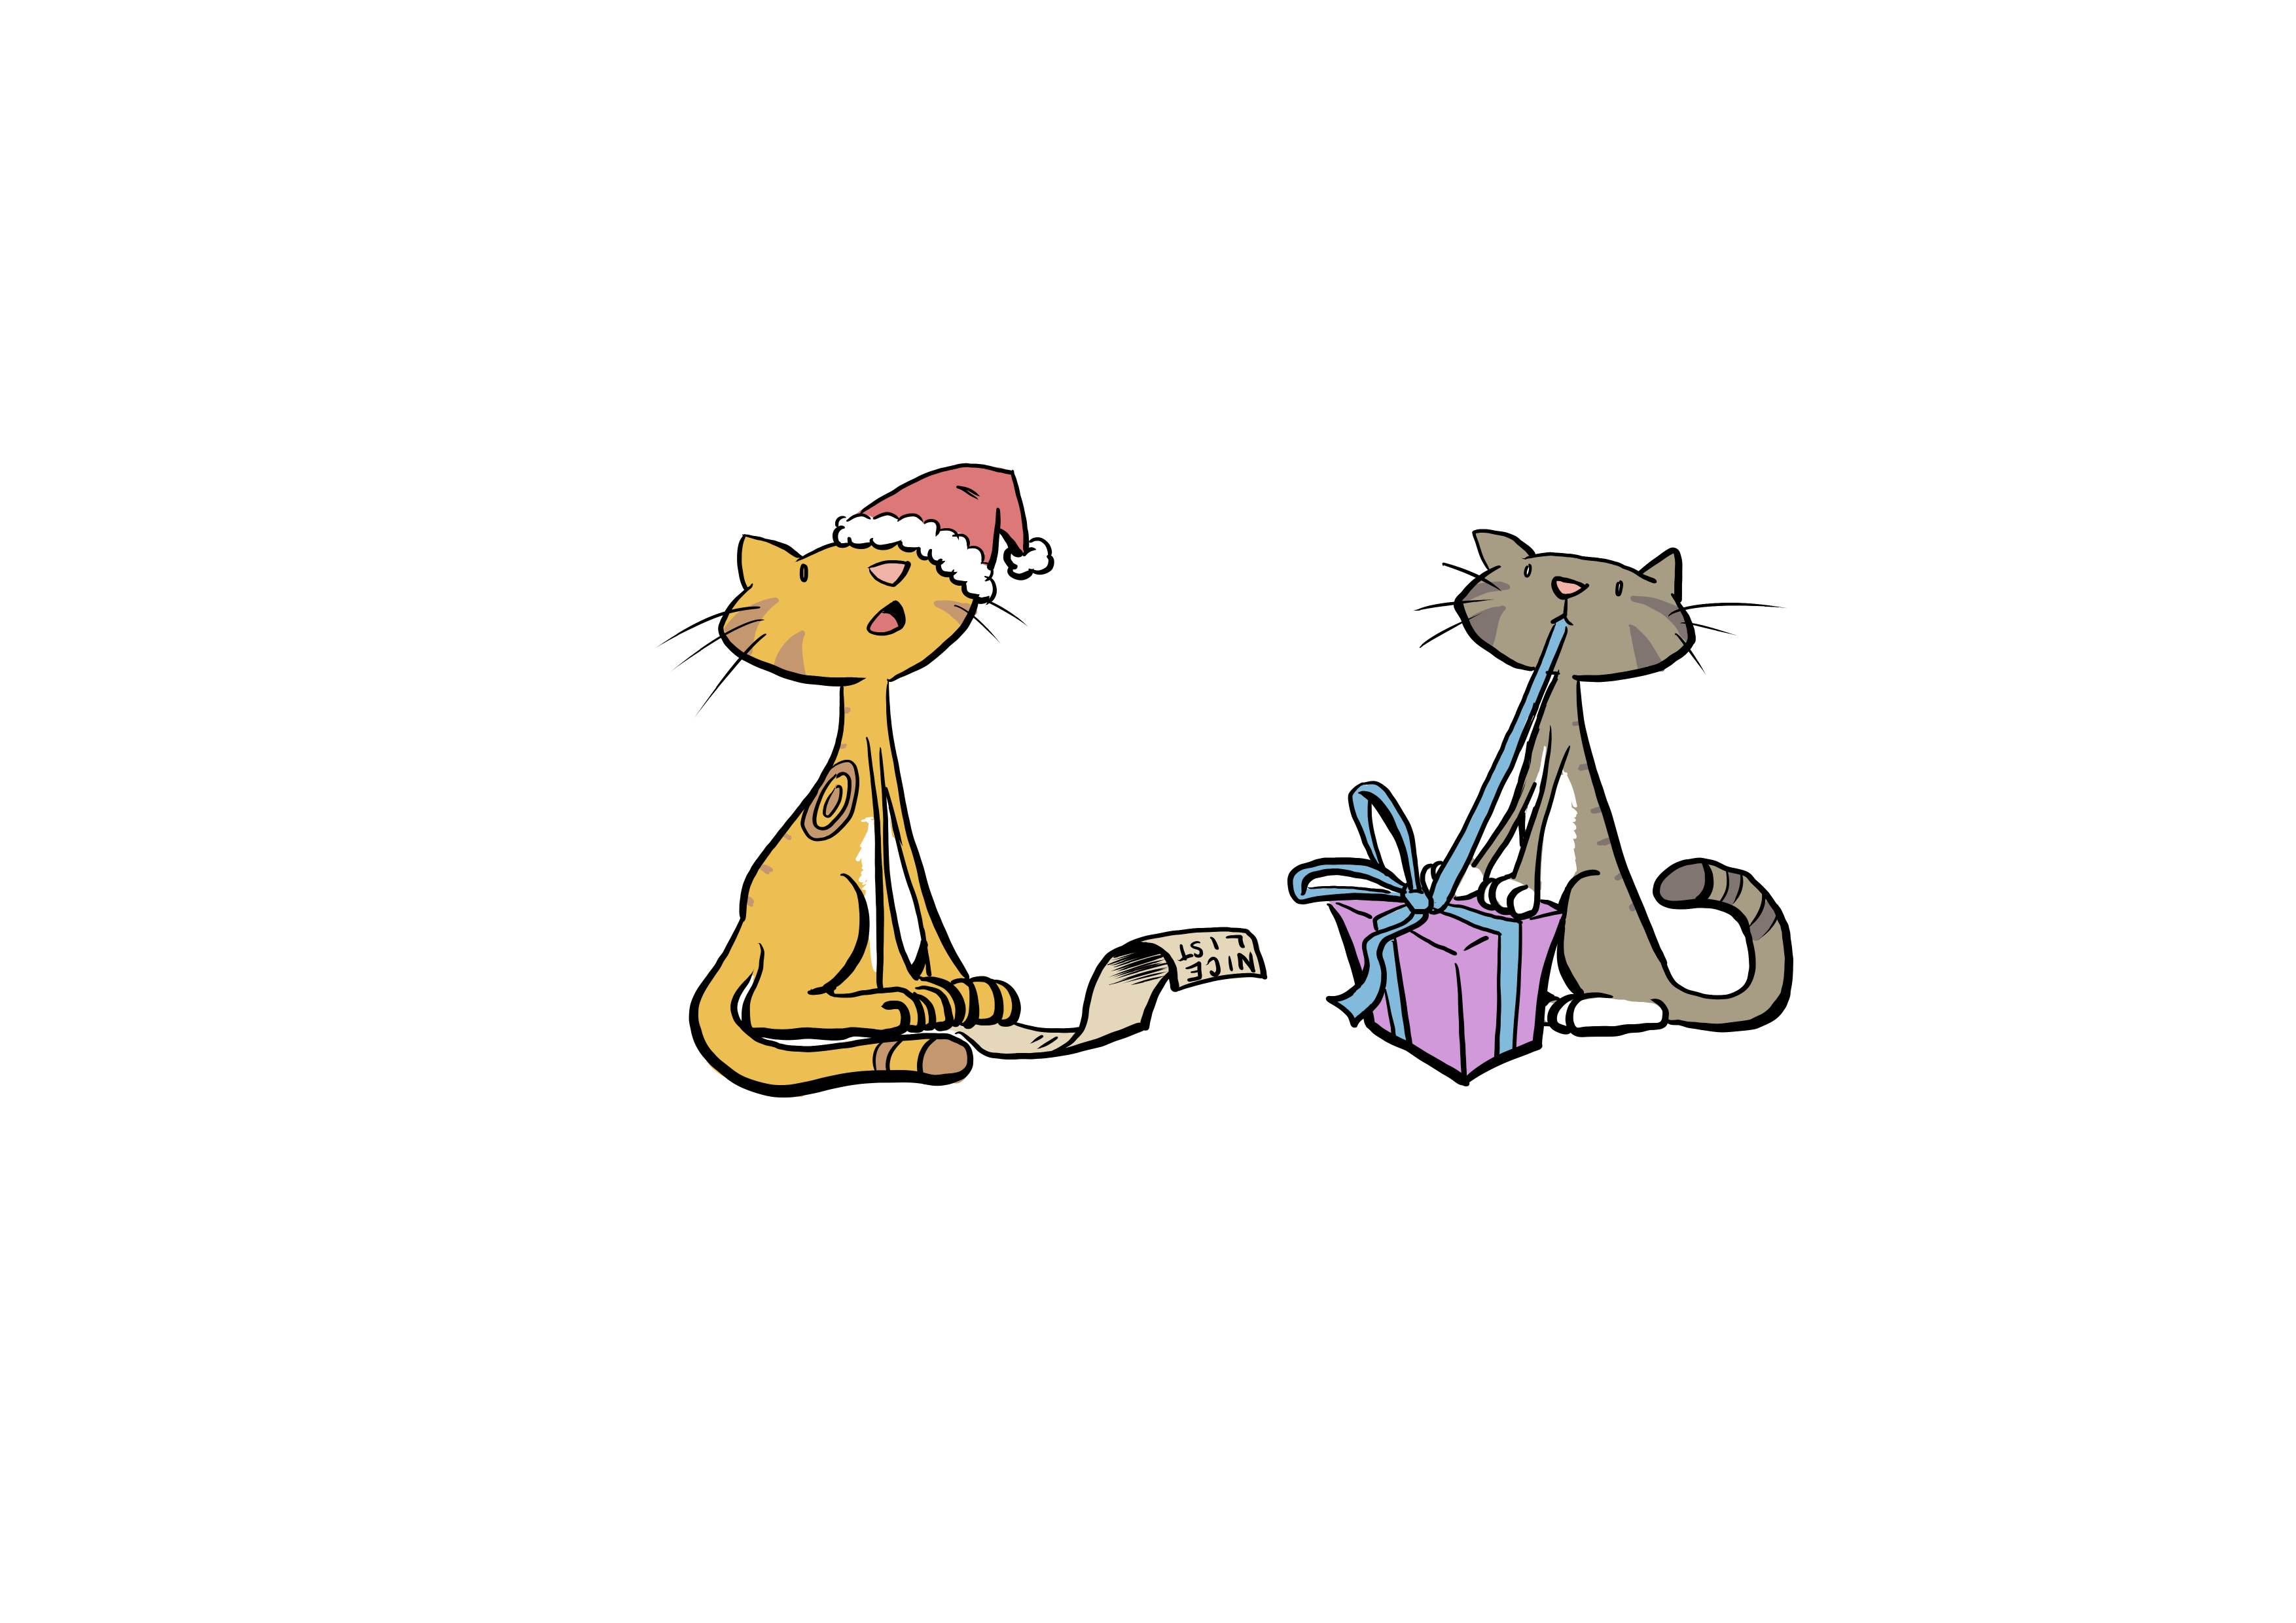 An orange tabby cat waering a Santa hat sits next to a brown tabby playing with the wrapping on a gift.